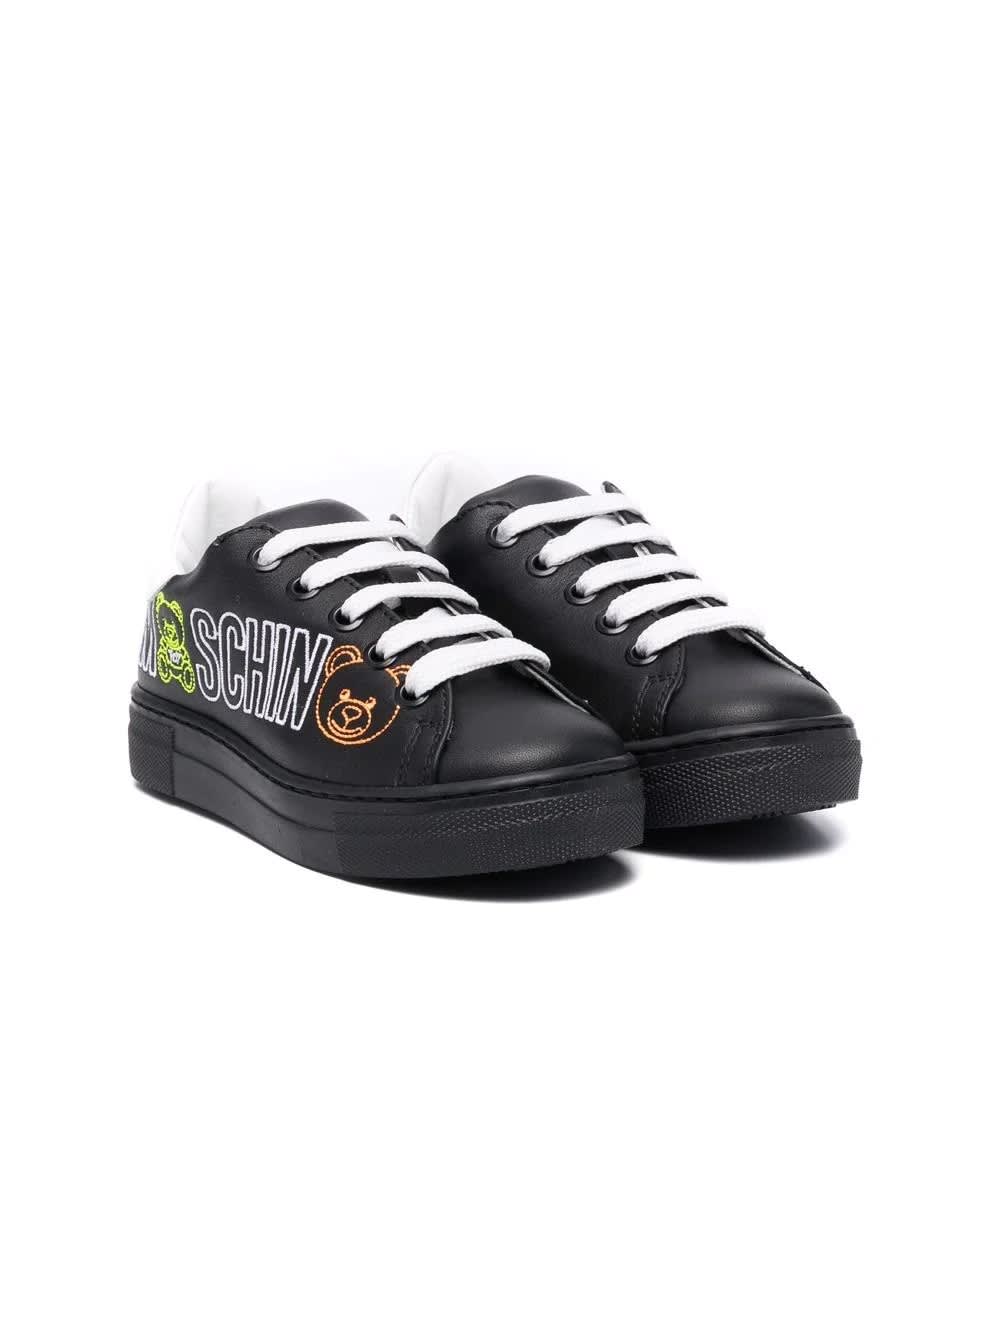 Moschino Sneakers With Teddy Bear Motif